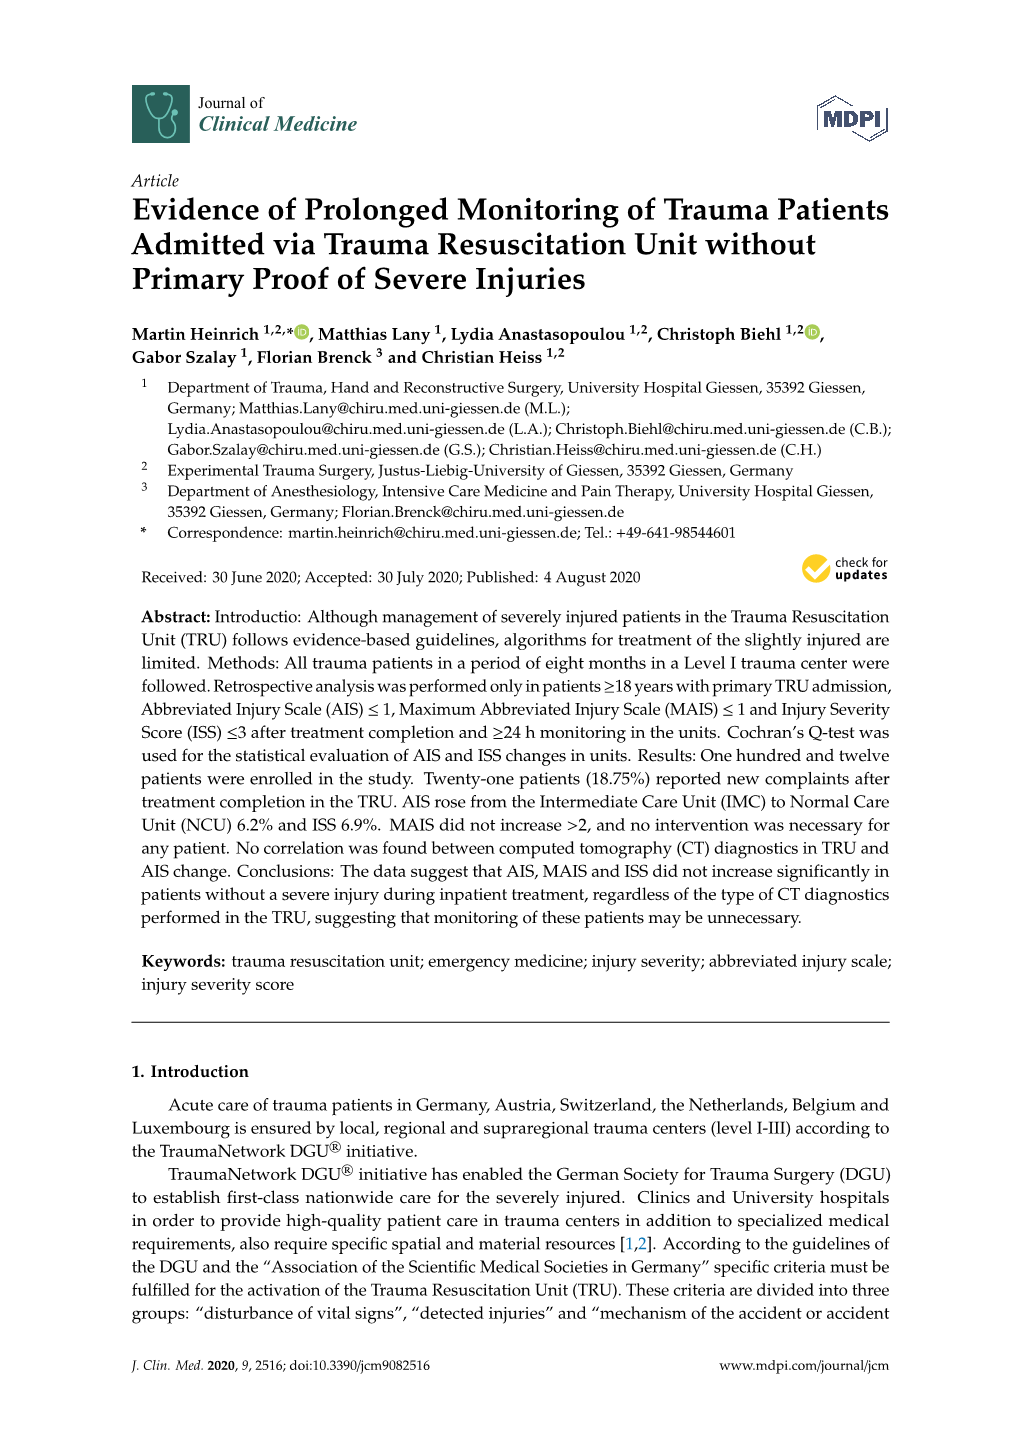 Evidence of Prolonged Monitoring of Trauma Patients Admitted Via Trauma Resuscitation Unit Without Primary Proof of Severe Injuries